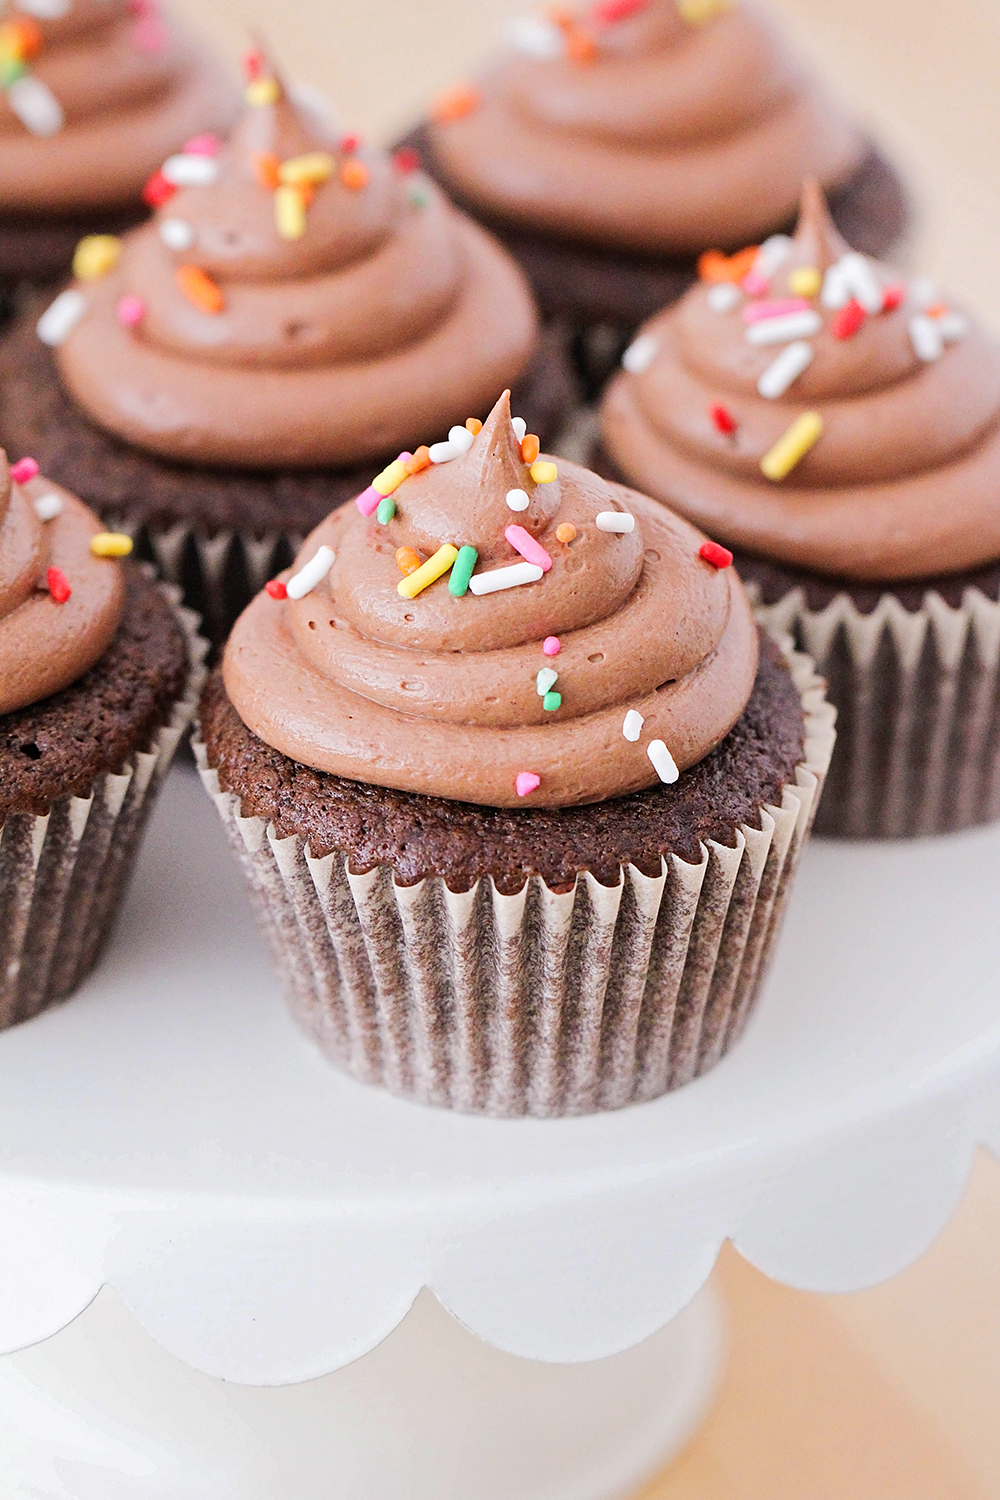 These best ever chocolate cupcakes are amazingly delicious! Tender, moist chocolate cake topped by a light and fluffy chocolate frosting. Perfect for birthdays and special occasions!